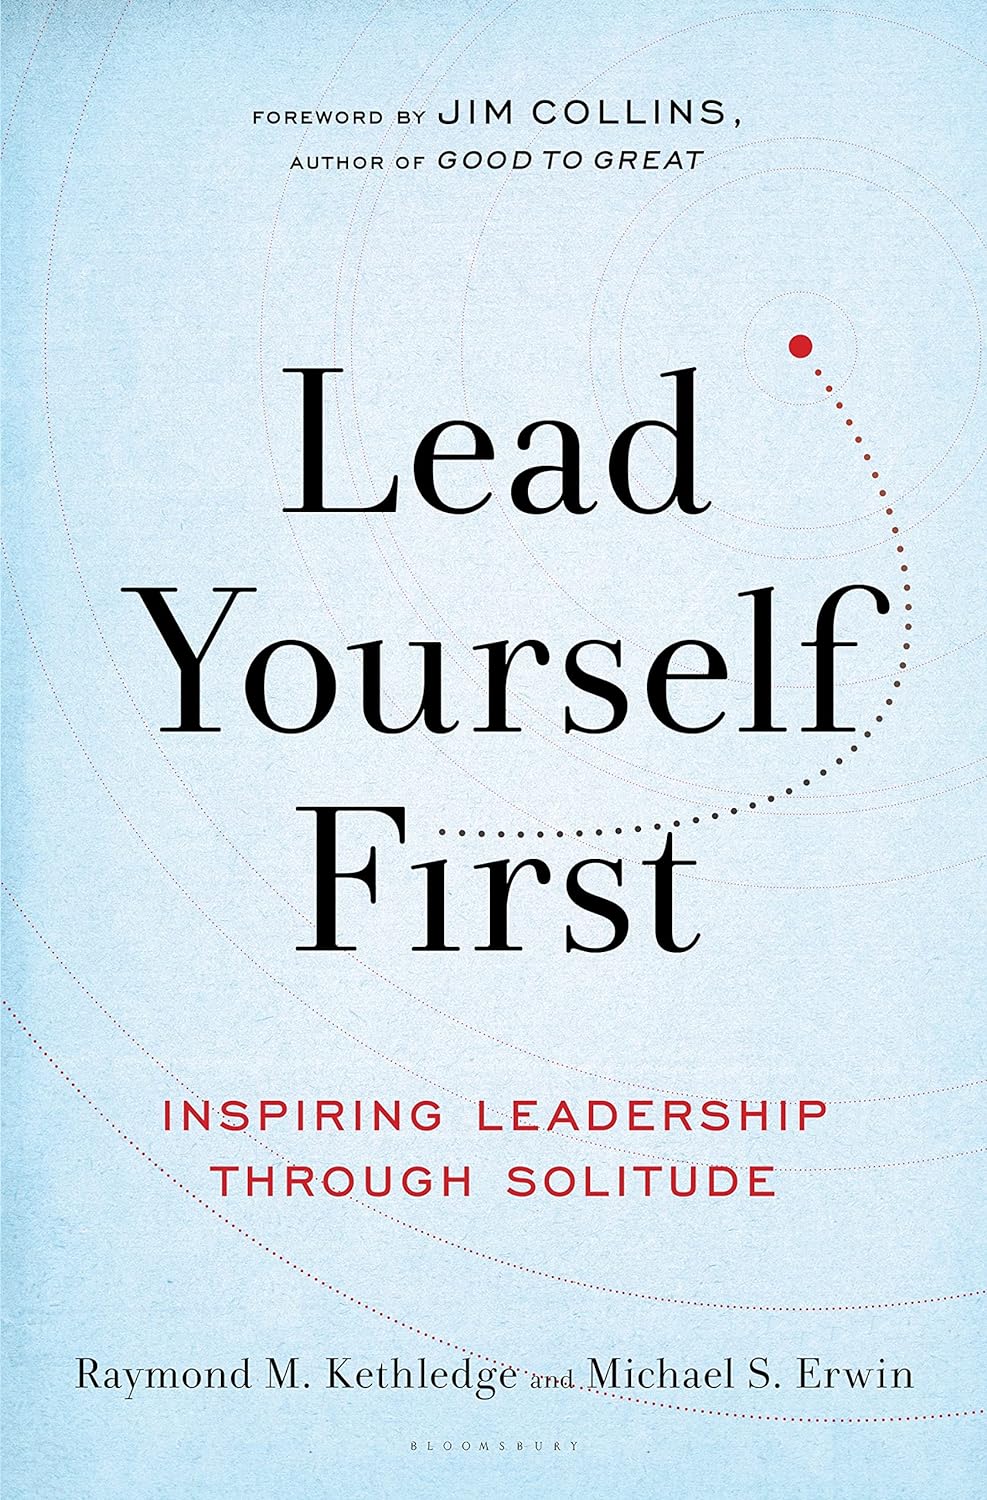 Jim Collins - Lead Yourself First. Inspiring Leadership Through Solitude